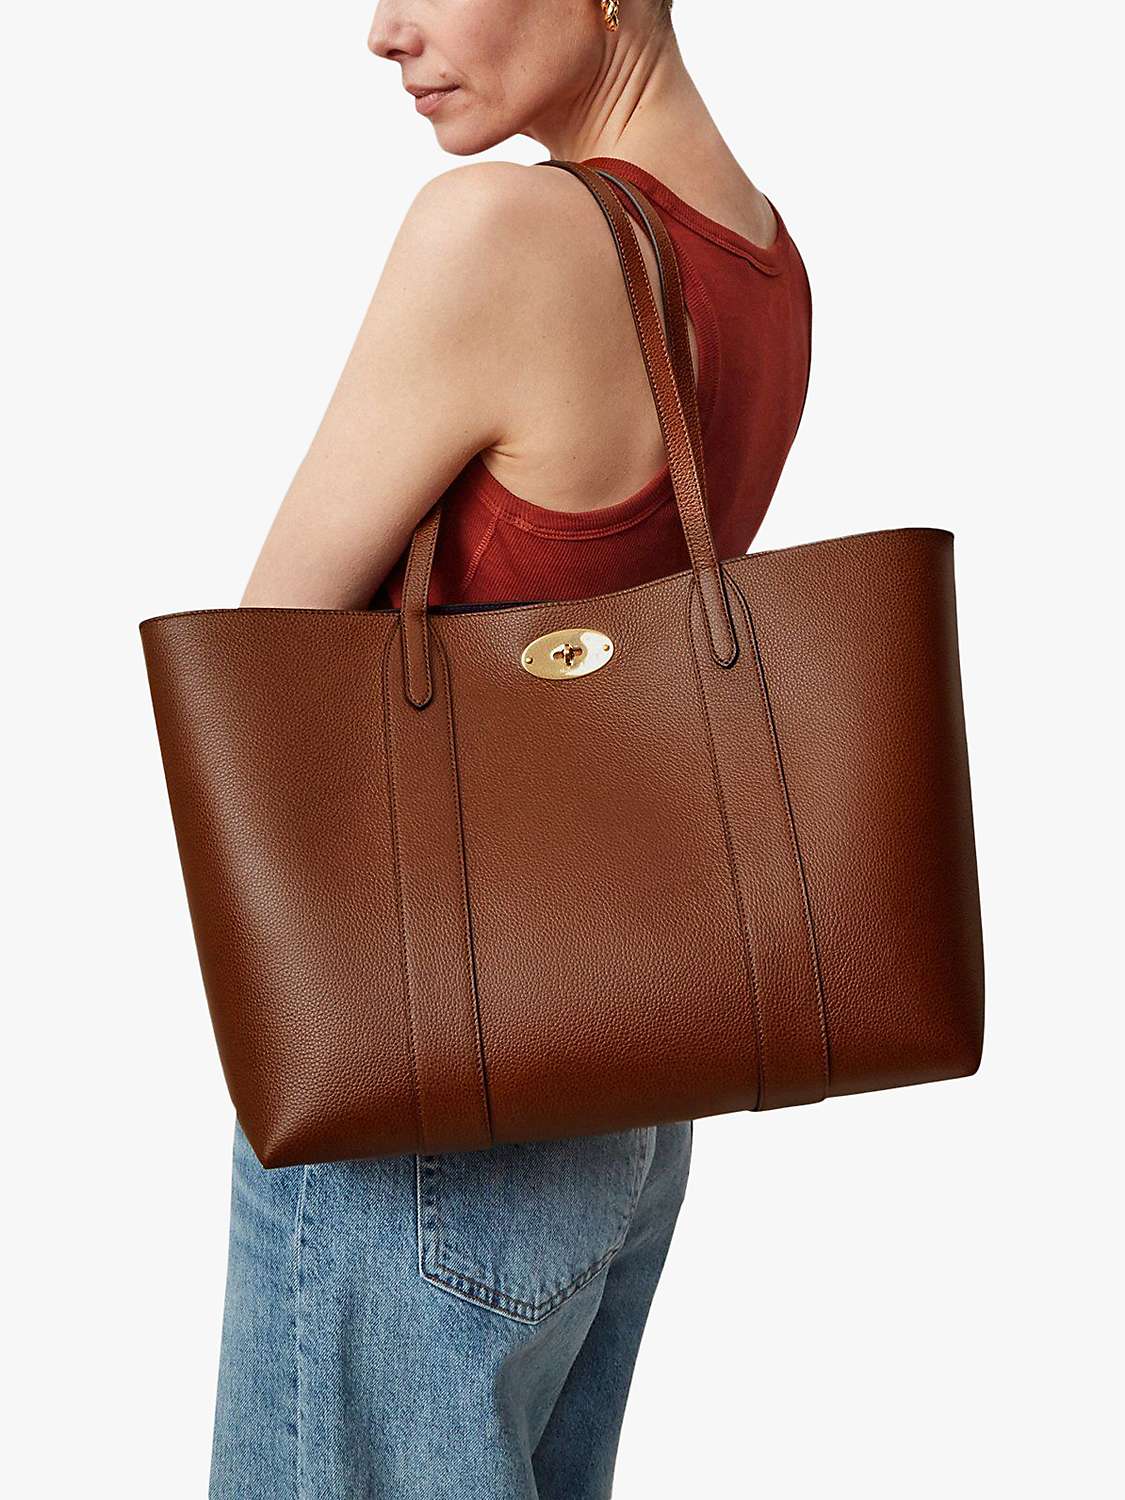 Buy Mulberry Bayswater Small Classic Grain Leather Tote Bag Online at johnlewis.com